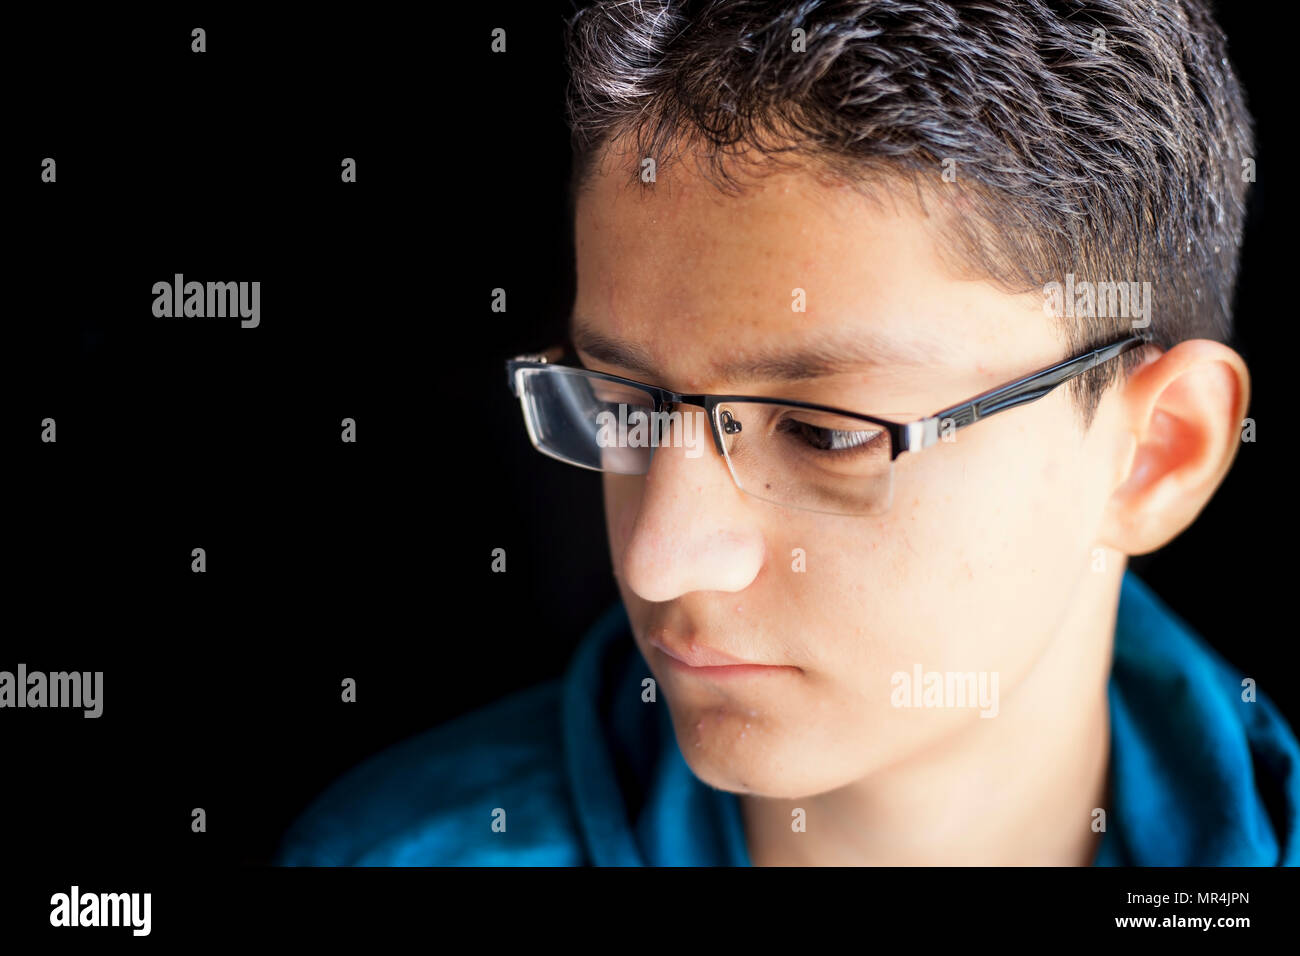 Portrait Of Young Teenager Boy Wearing Half Rim Black Colored Reading Glass Or Spectacles And A Green Hooded T Shirt Posing In Black Dark Background L Stock Photo Alamy